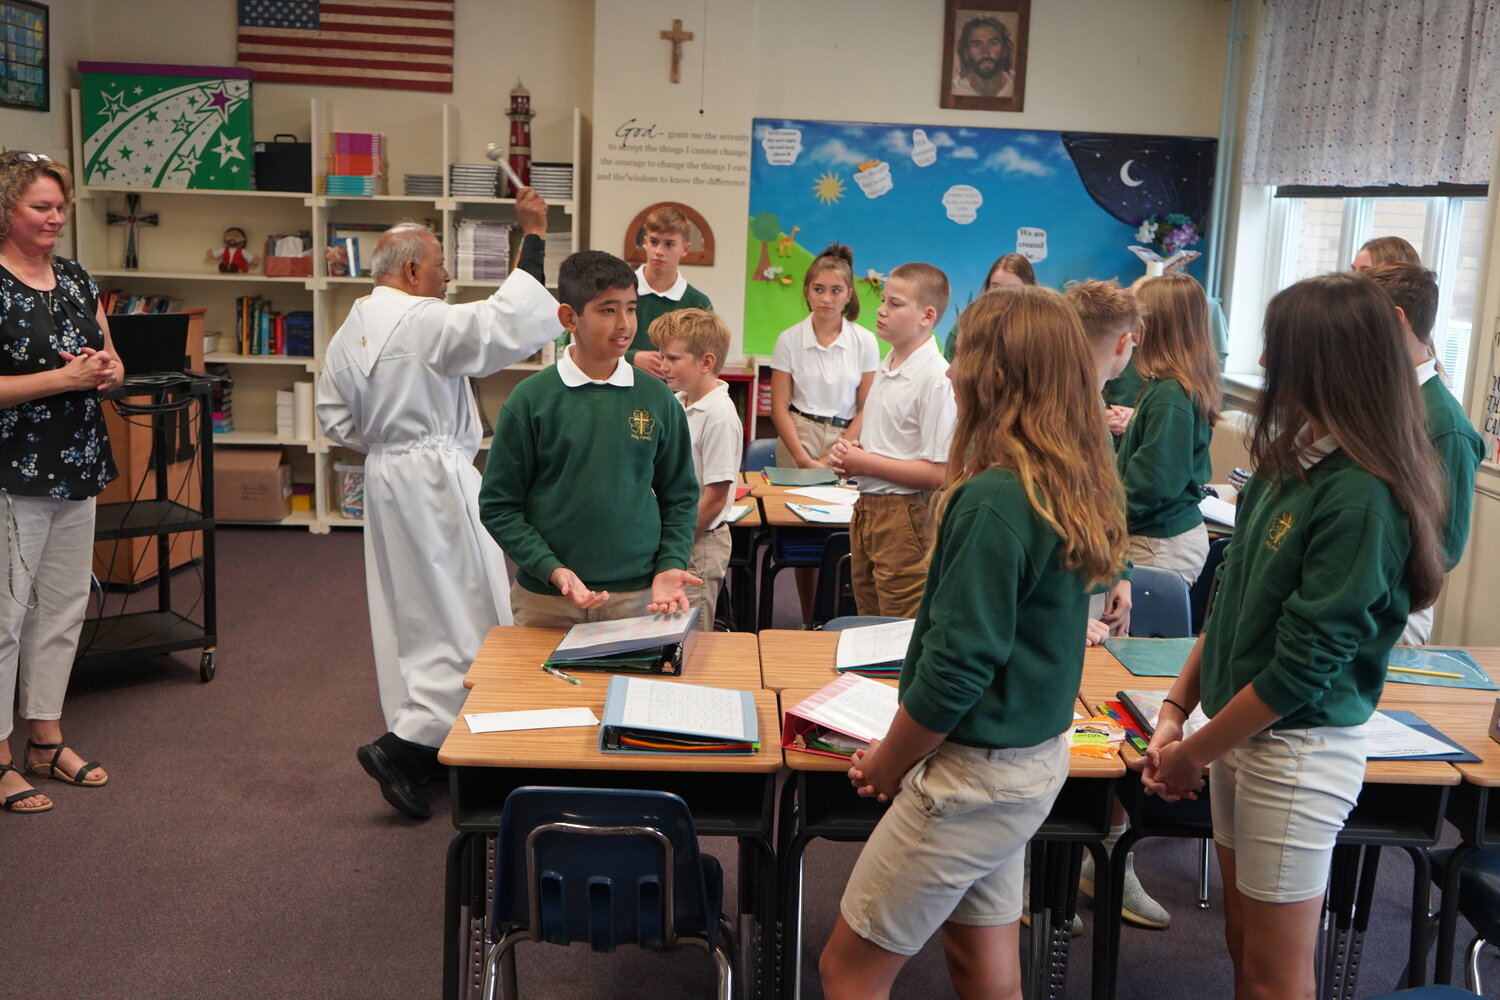 Father Alexander Gabriel, pastor of Holy Family Parish in Hannibal and St. Joseph Parish in Palmyra, blesses the eighth-grade classroom and its students on the first day of school at Holy Family School in Hannibal. He would visit all the classrooms, pray with the students and sprinkle them with holy water.